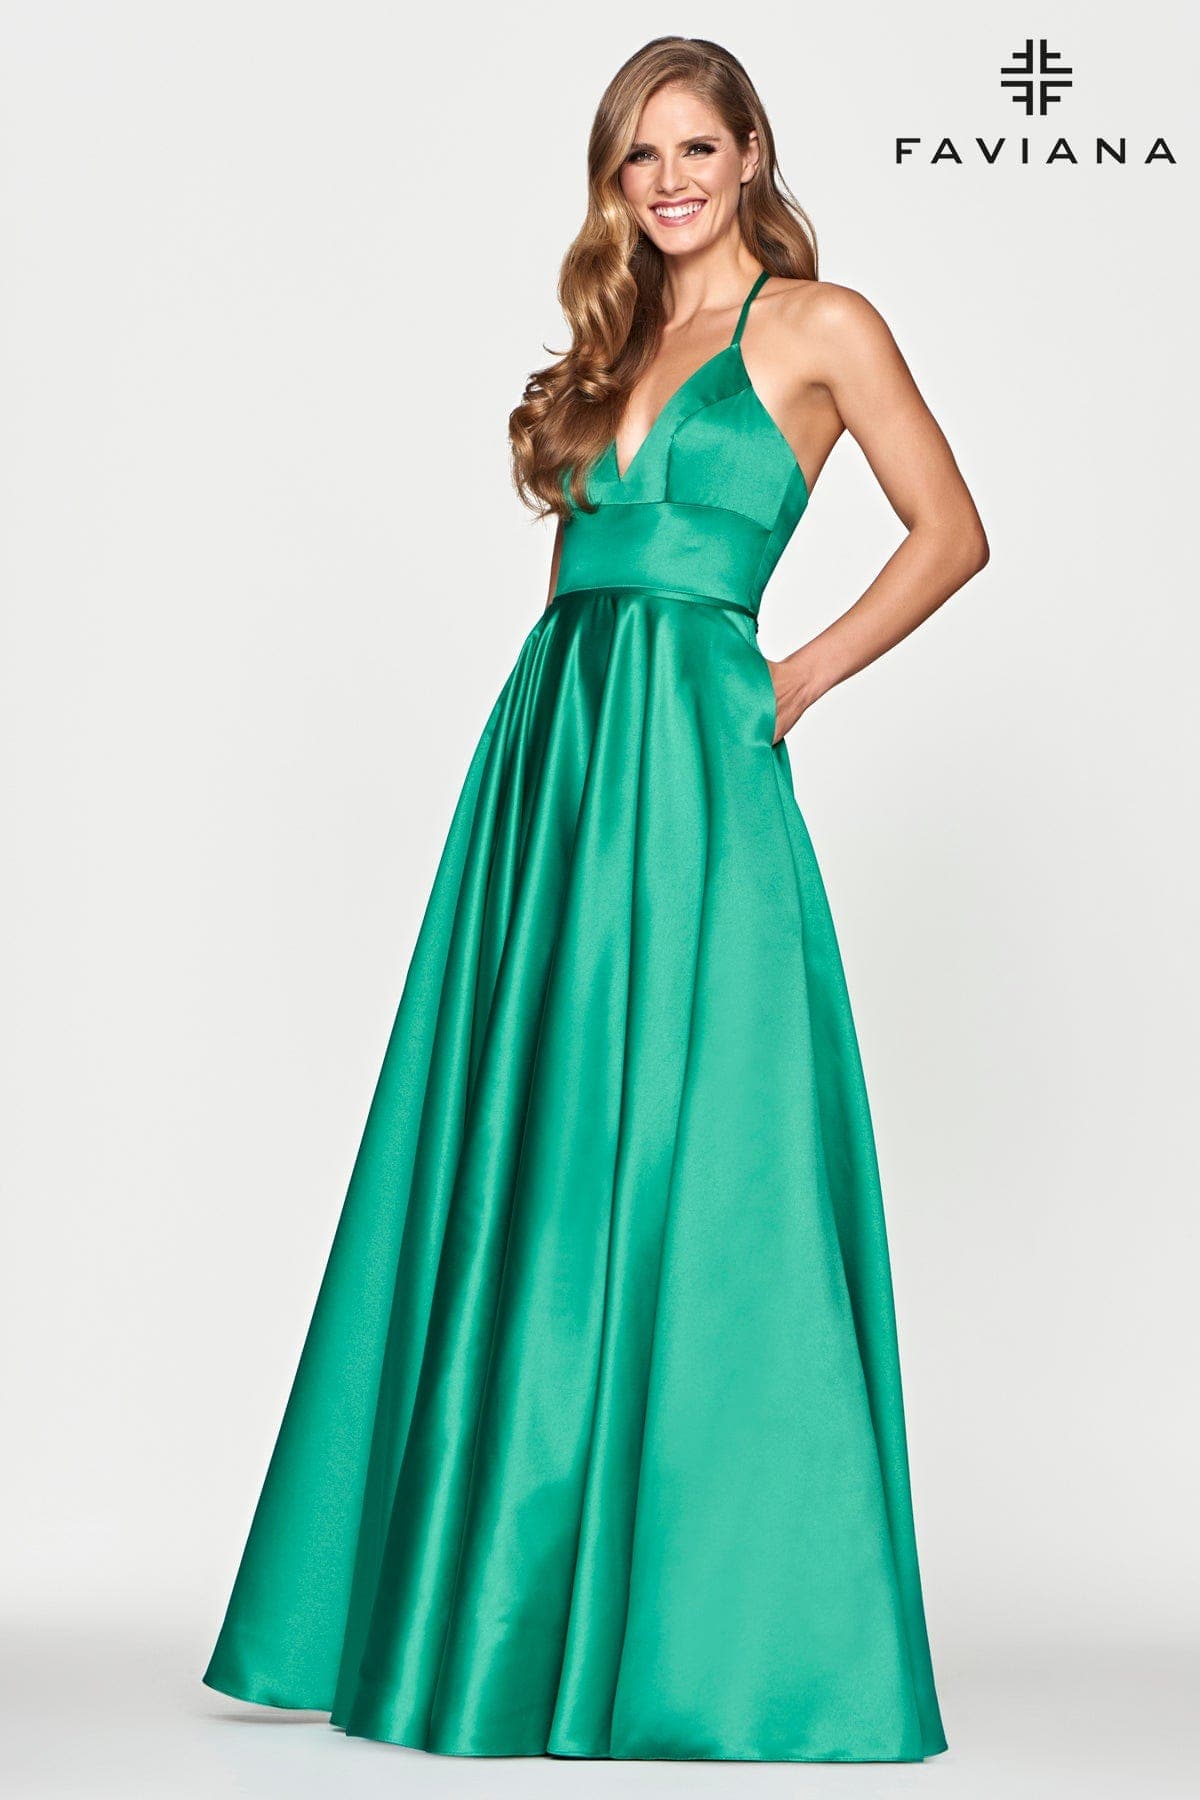 Satin Ballgown Dress With Lace Up Back And V Neck